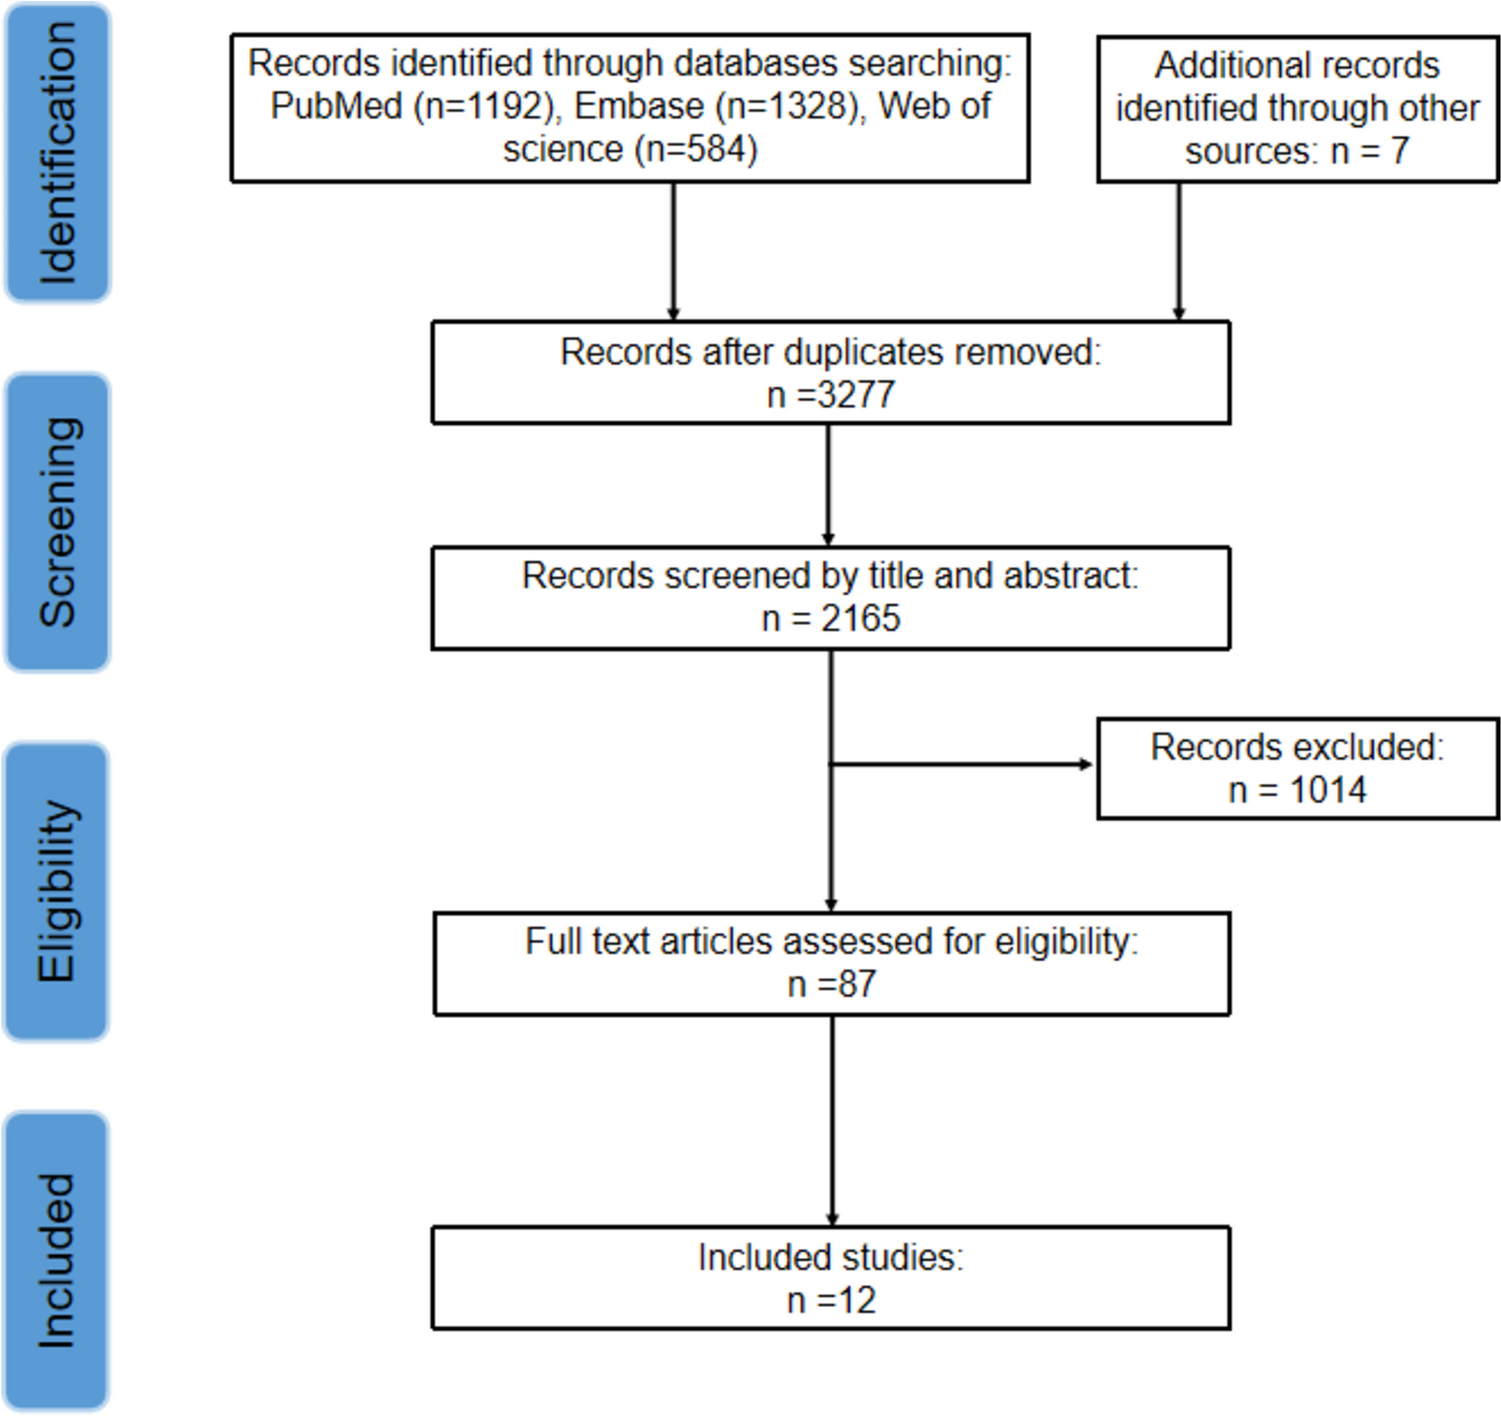 Effect of Continuous Positive Airway Pressure on Blood Pressure in Patients with Resistant Hypertension and Obstructive Sleep Apnea: An Updated Meta-analysis